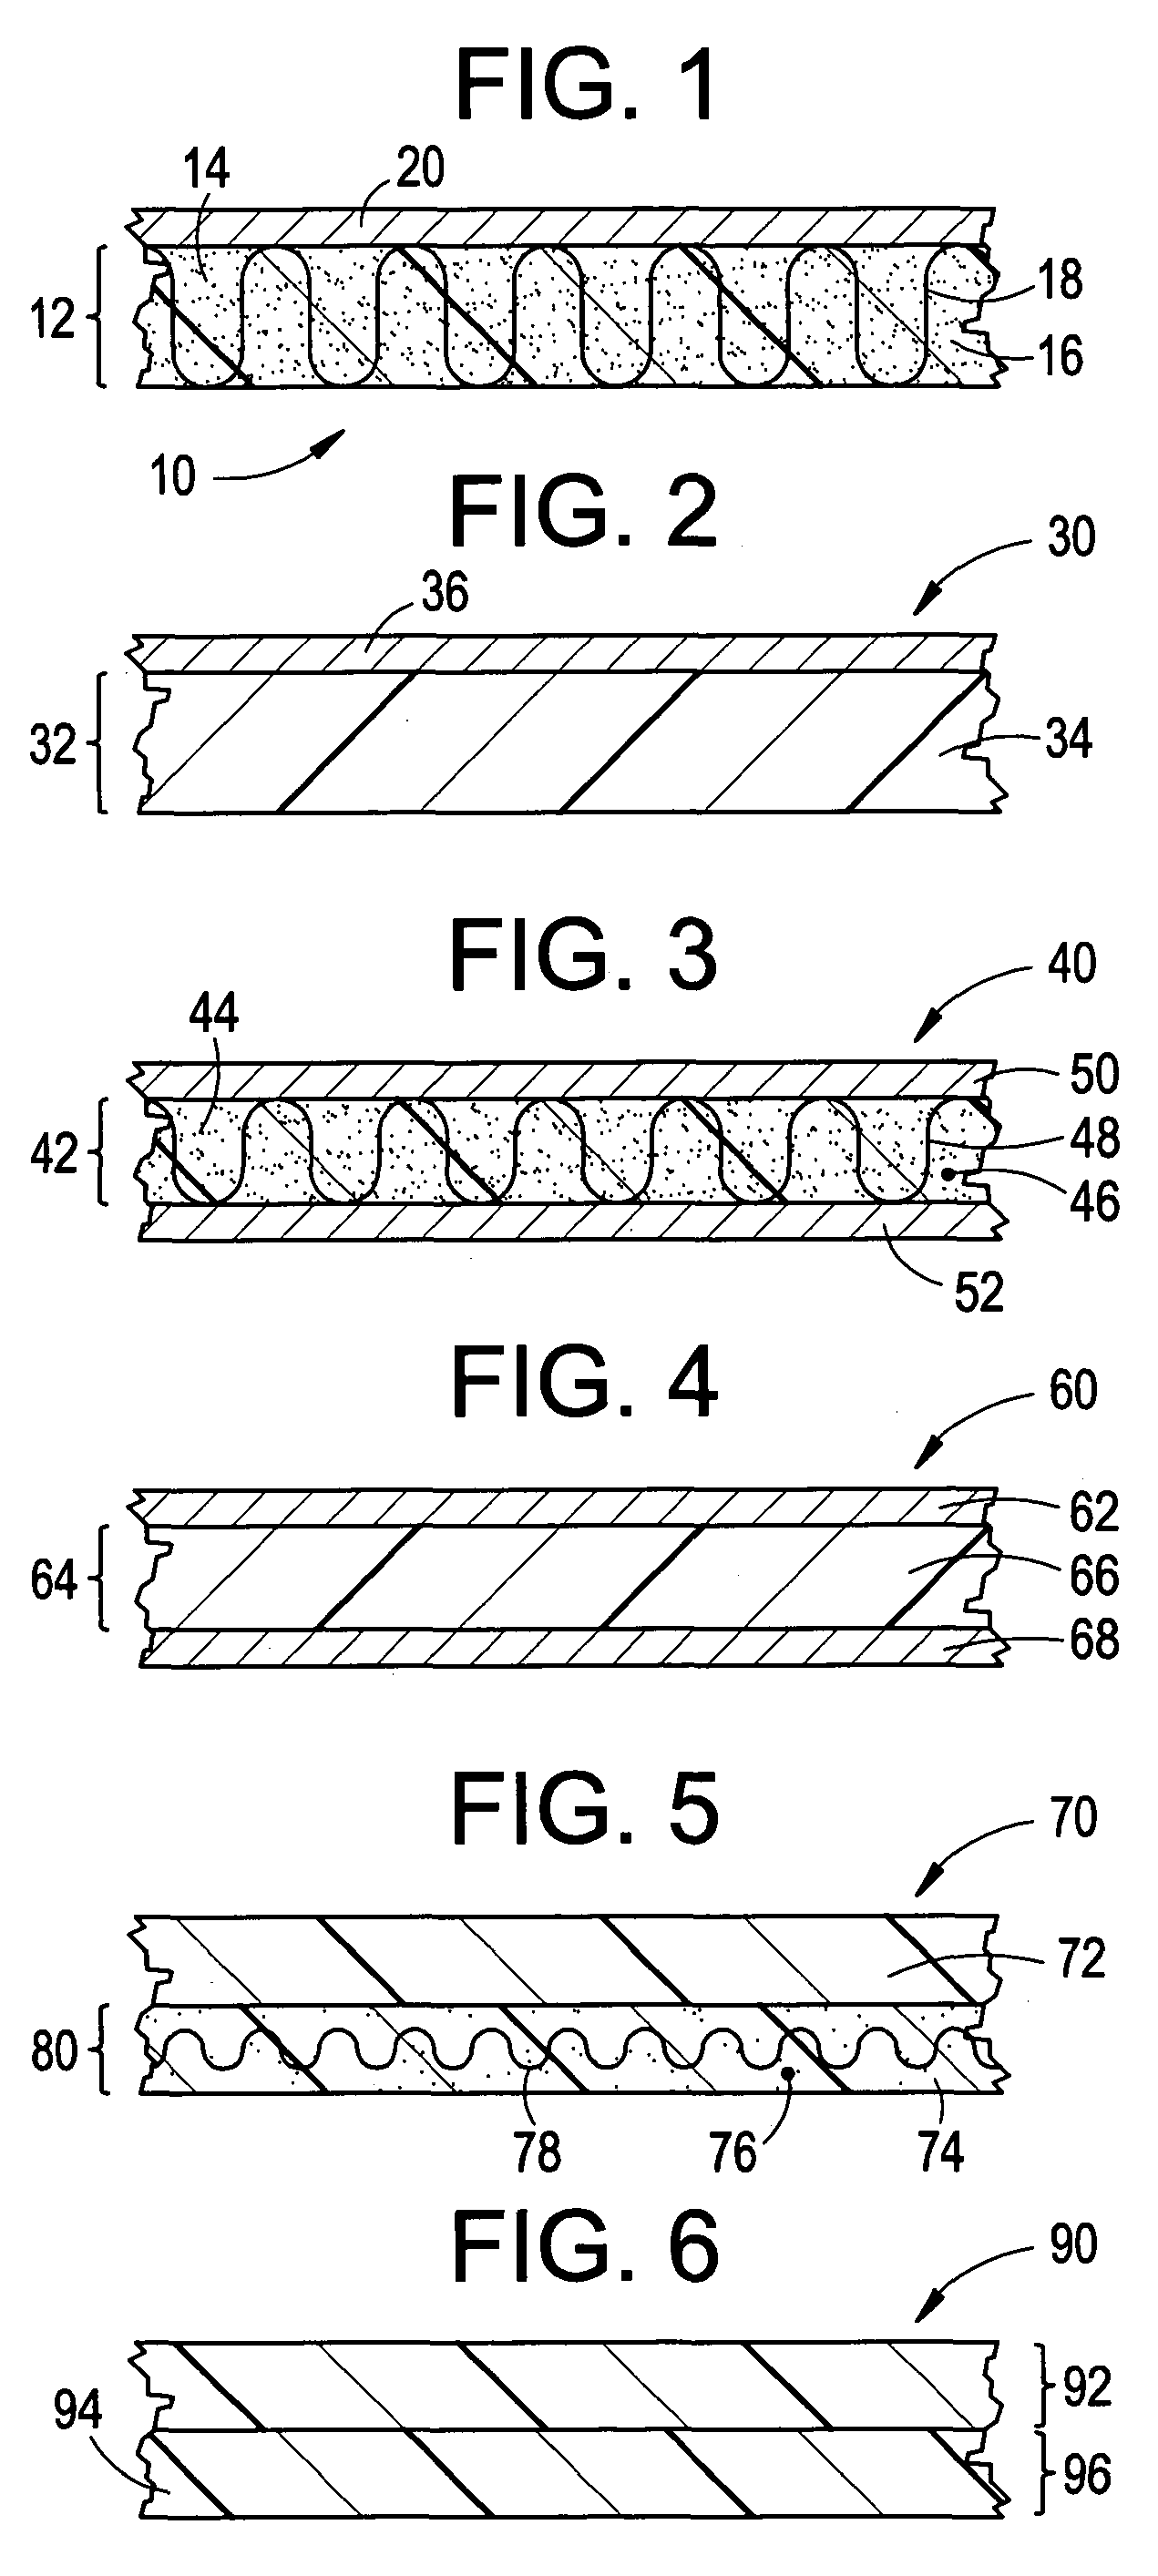 Circuit materials, circuits, multi-layer circuits, and methods of manufacture thereof